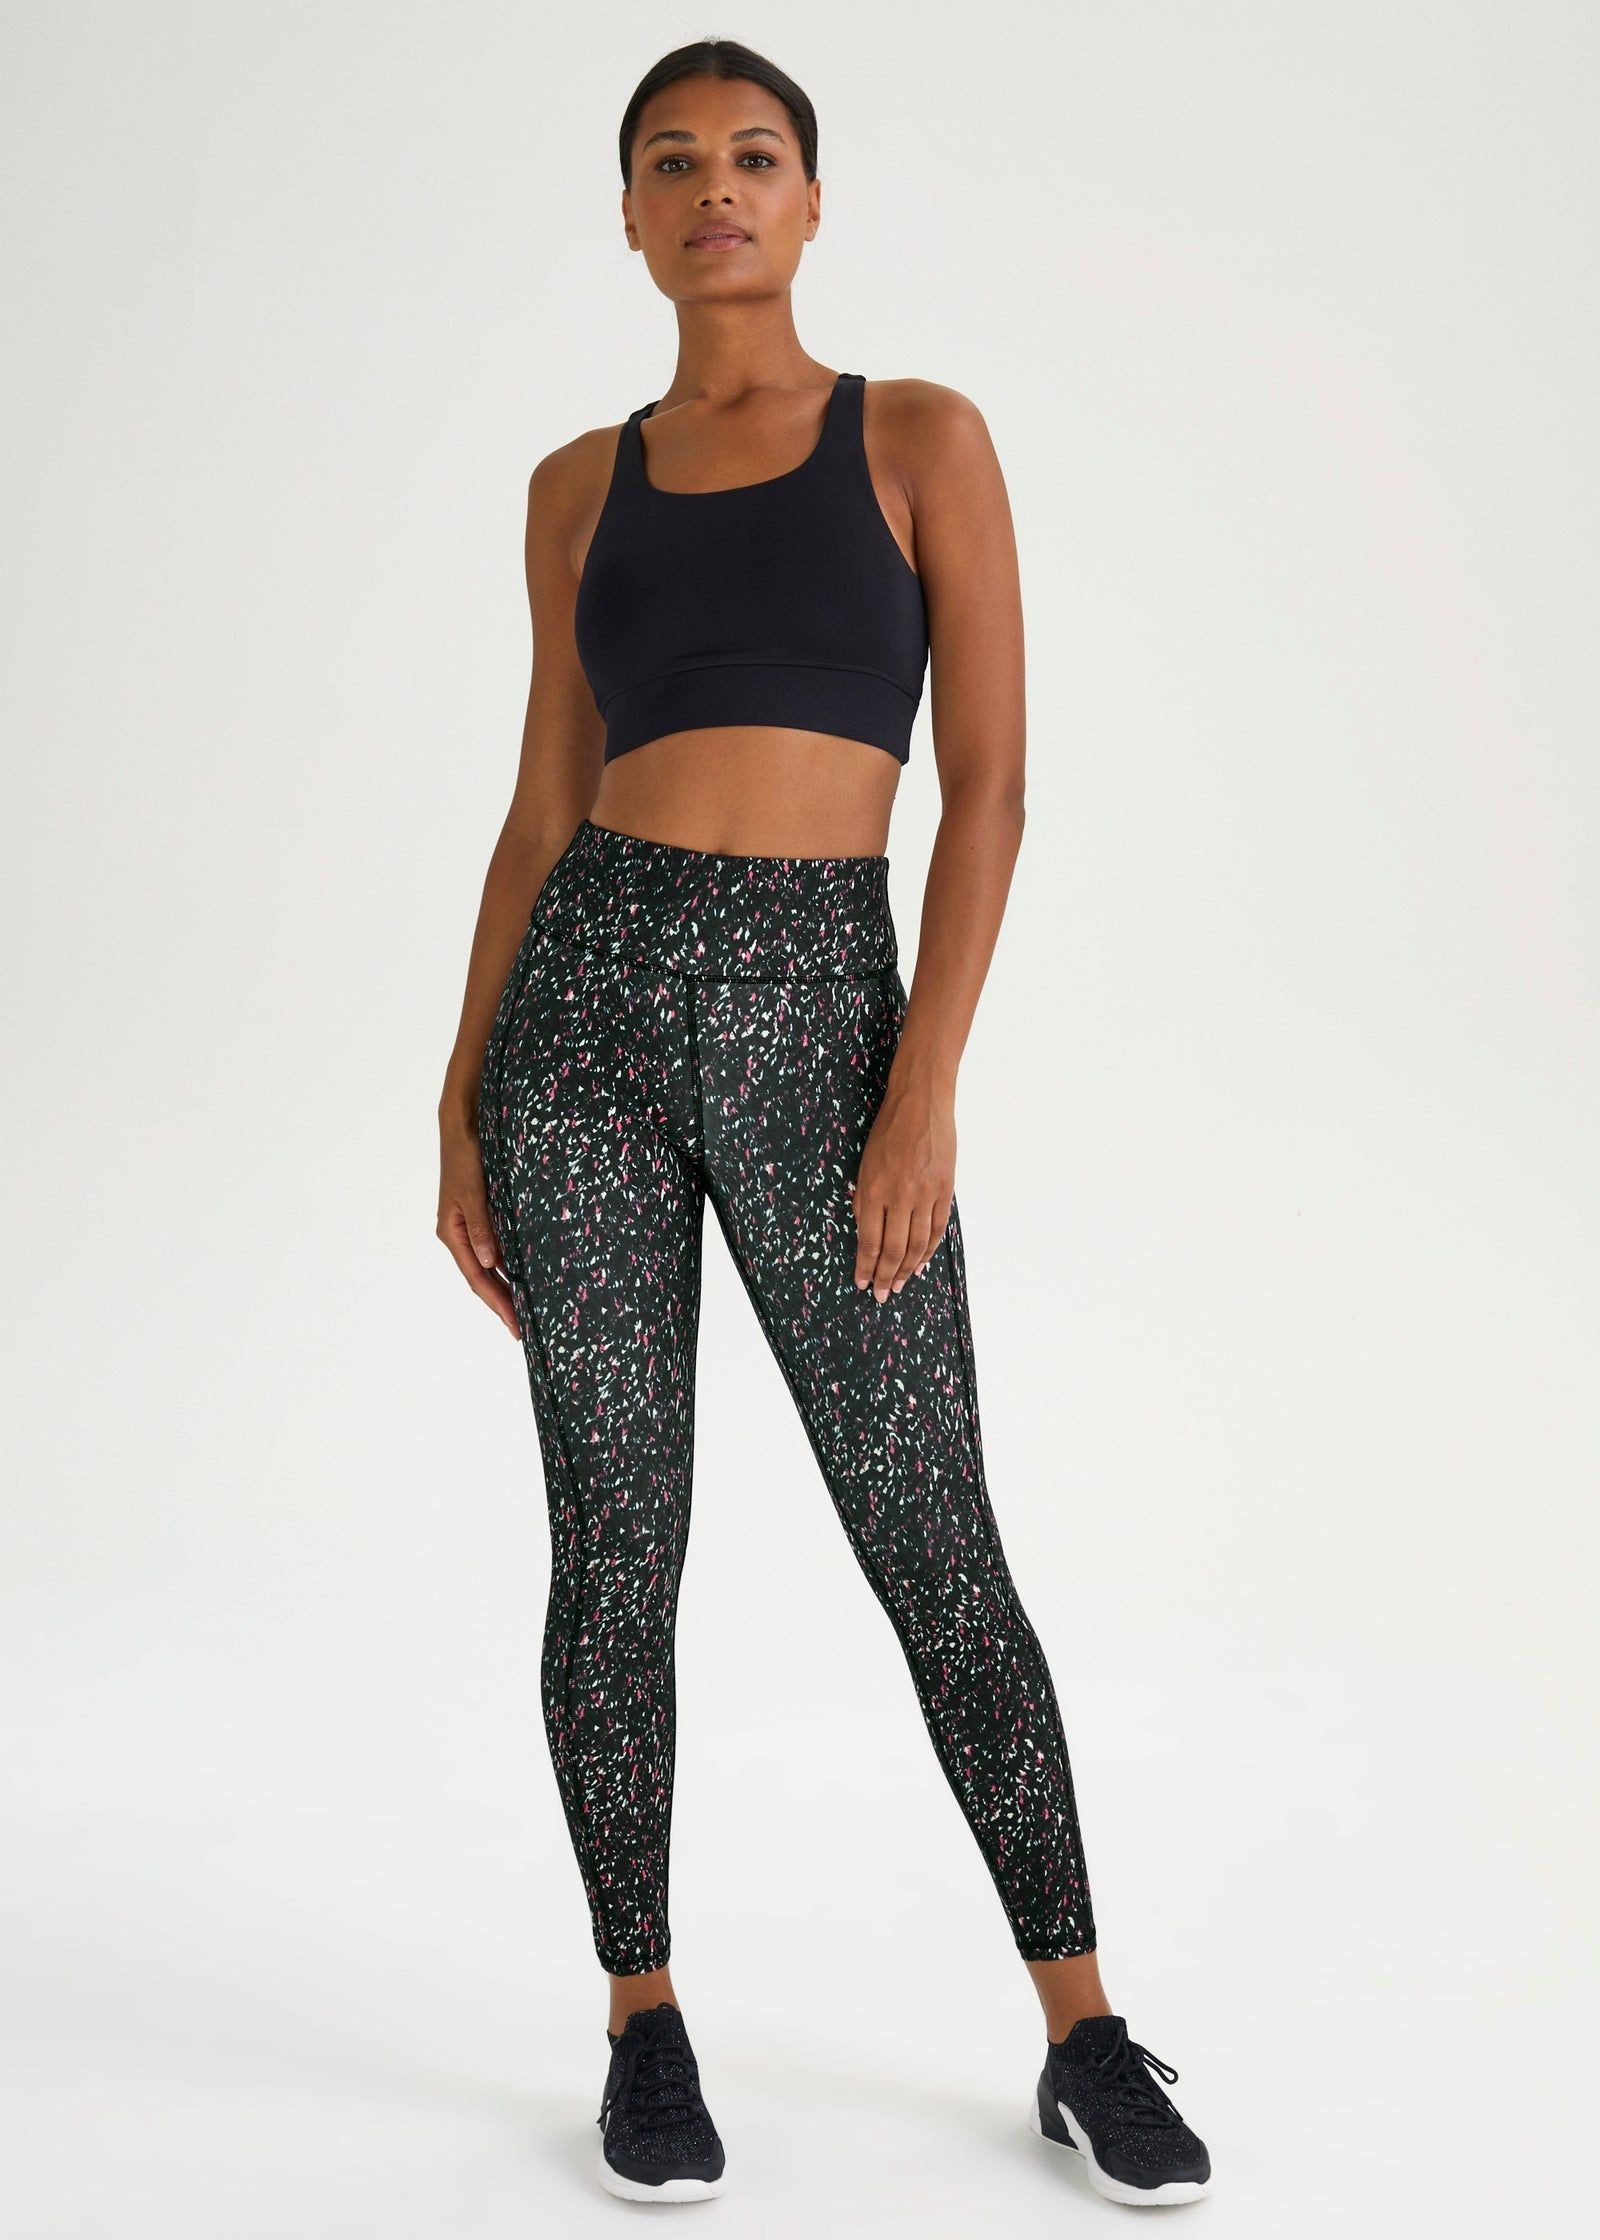 Buy Womens Sports Bottoms at Lowest Price in Jordan - bfab